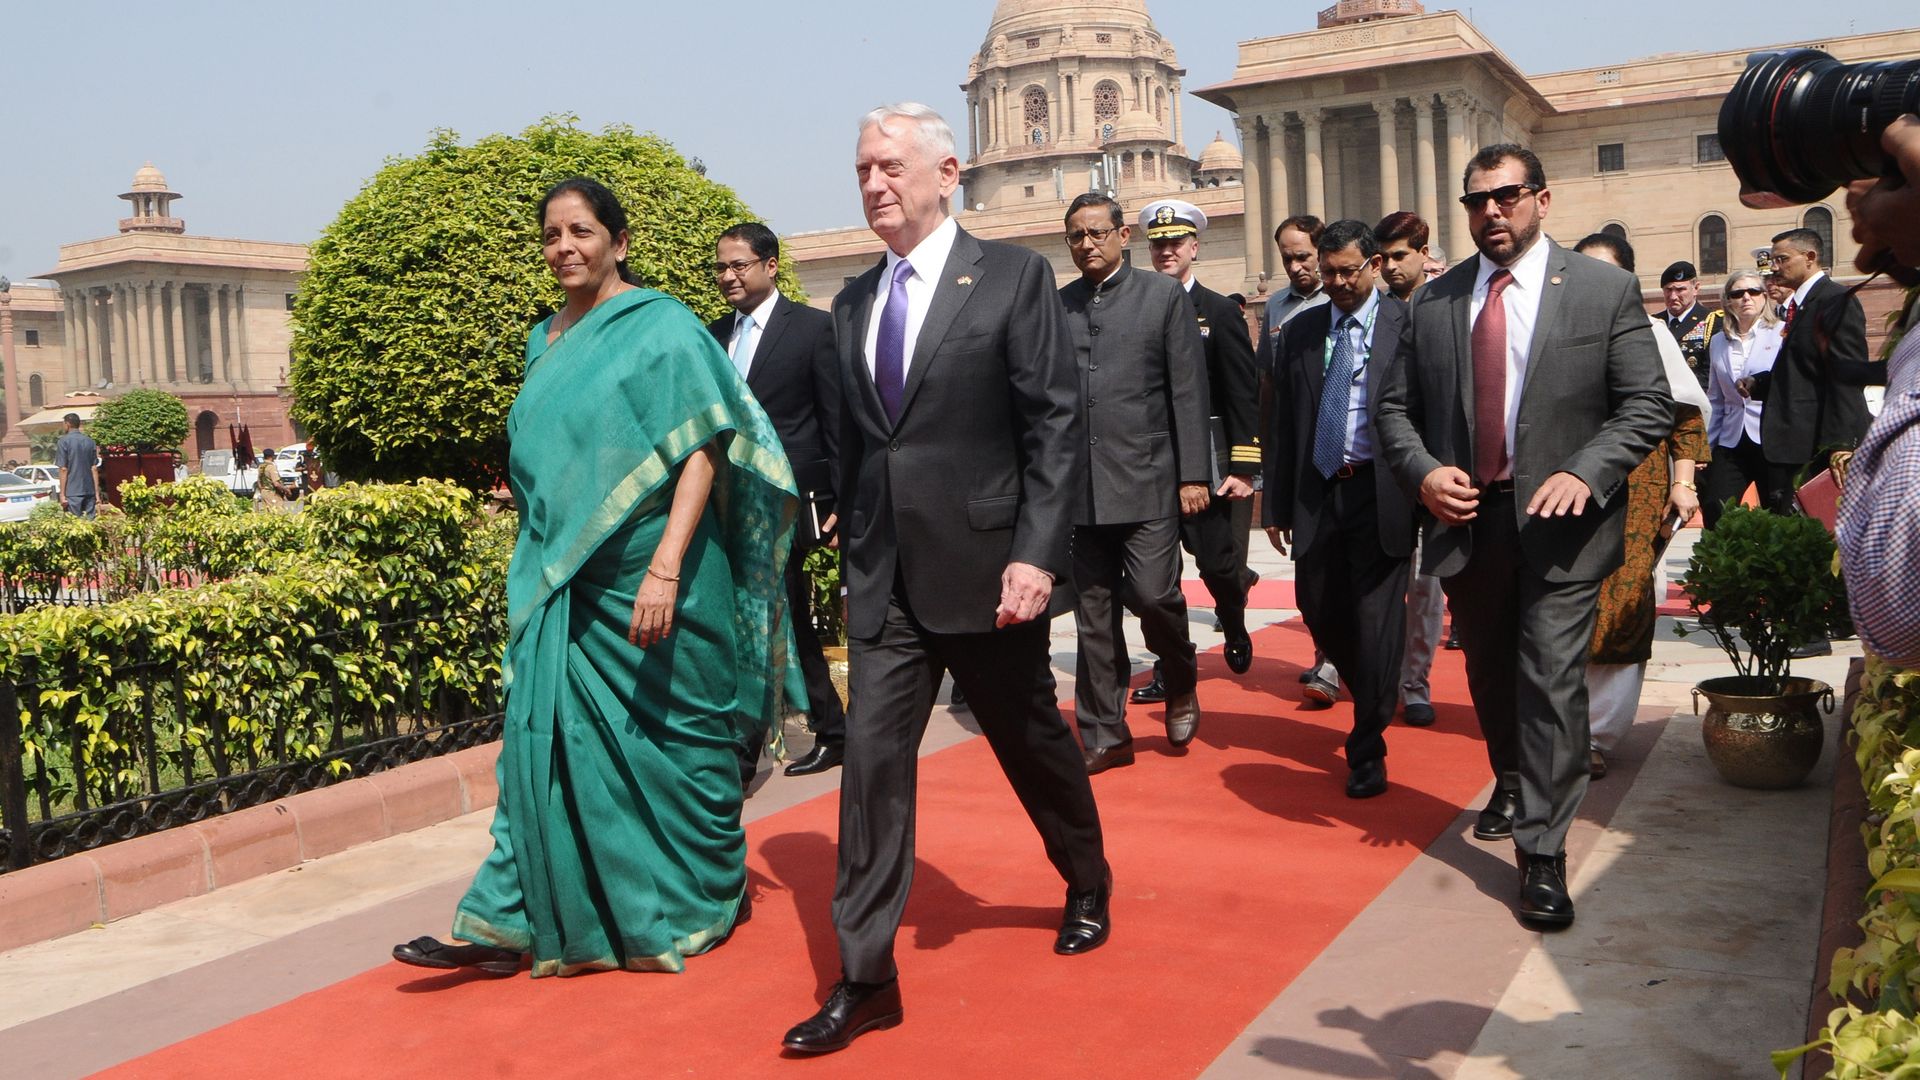 Defence Minister of India, Nirmala Sitharaman (L) welcomes US Secretary of Defence James Mattis  upon his arrival at the Indian Ministry of Defence in New Delhi, India on September 26, 2017. 